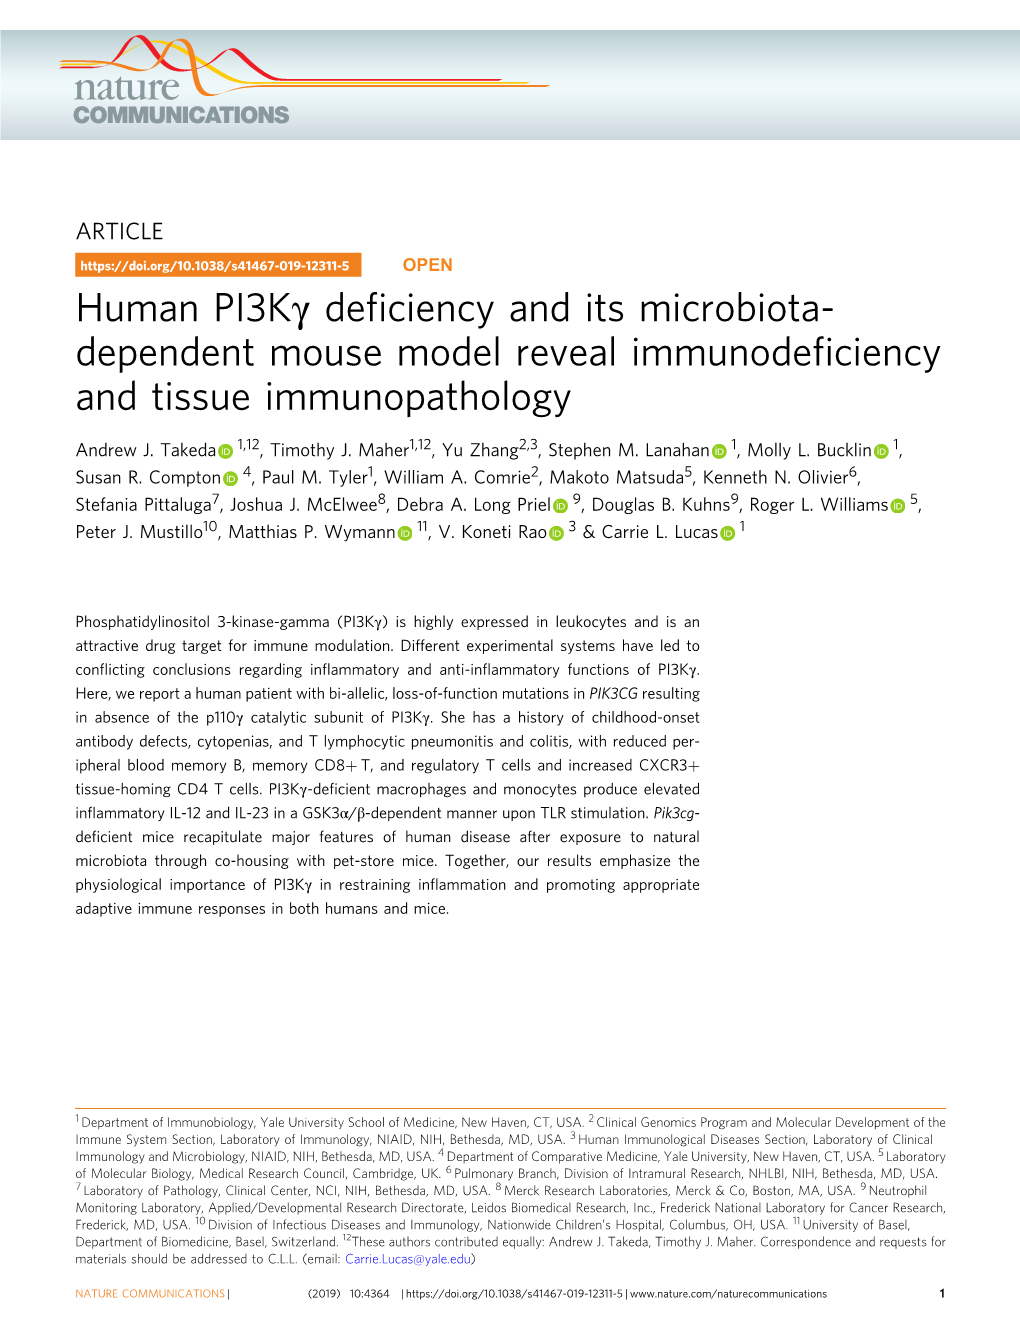 Human PI3KÎ³ Deficiency and Its Microbiota-Dependent Mouse